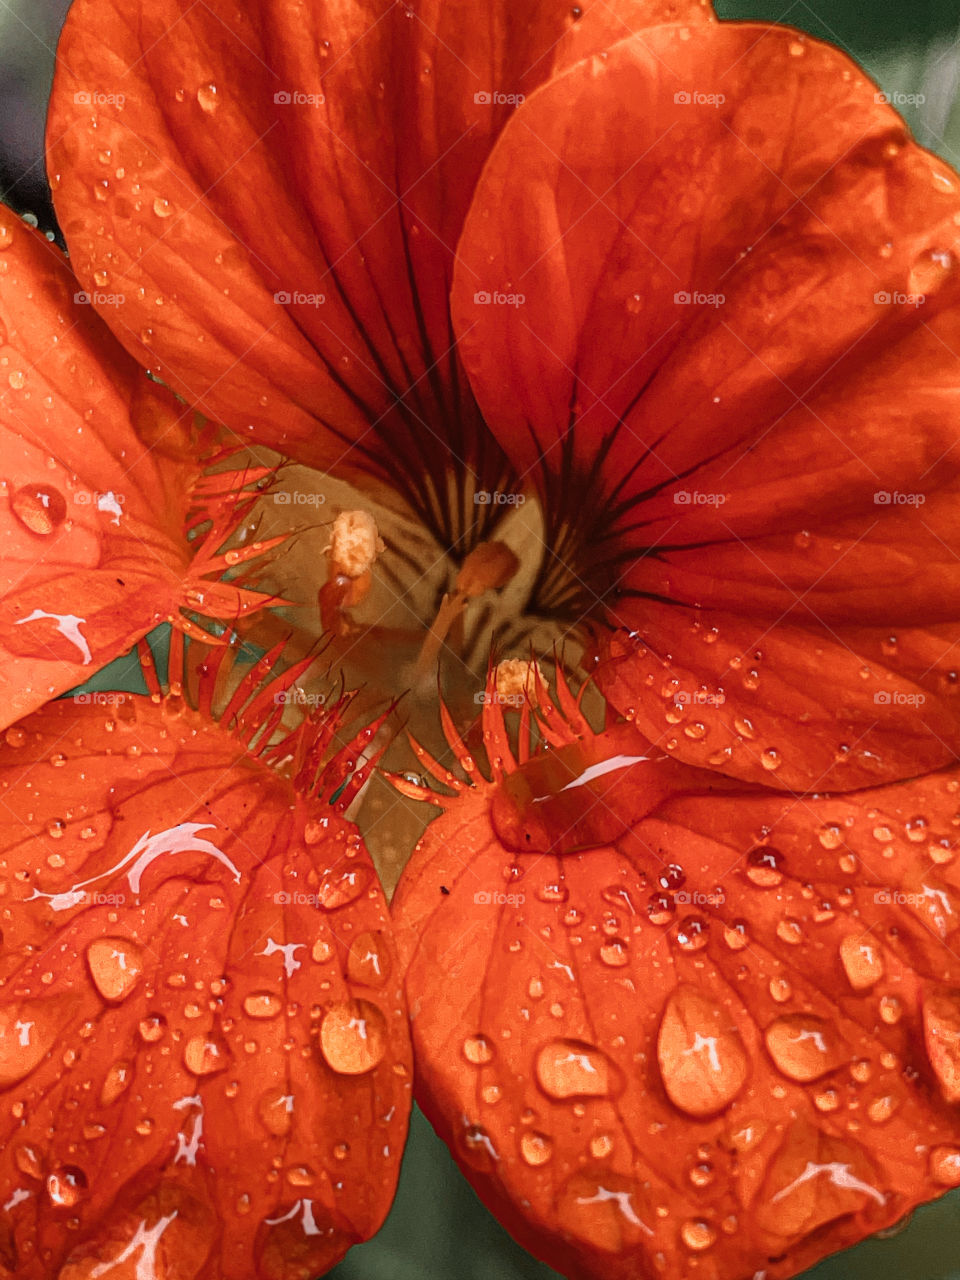 leaf rainfall green raindrops waterdrops droplets wet water rain drop outside nature outdoors elements dew dewdrops plant plants leafs Grass splashes phone photography Orange flower flowers close up petals